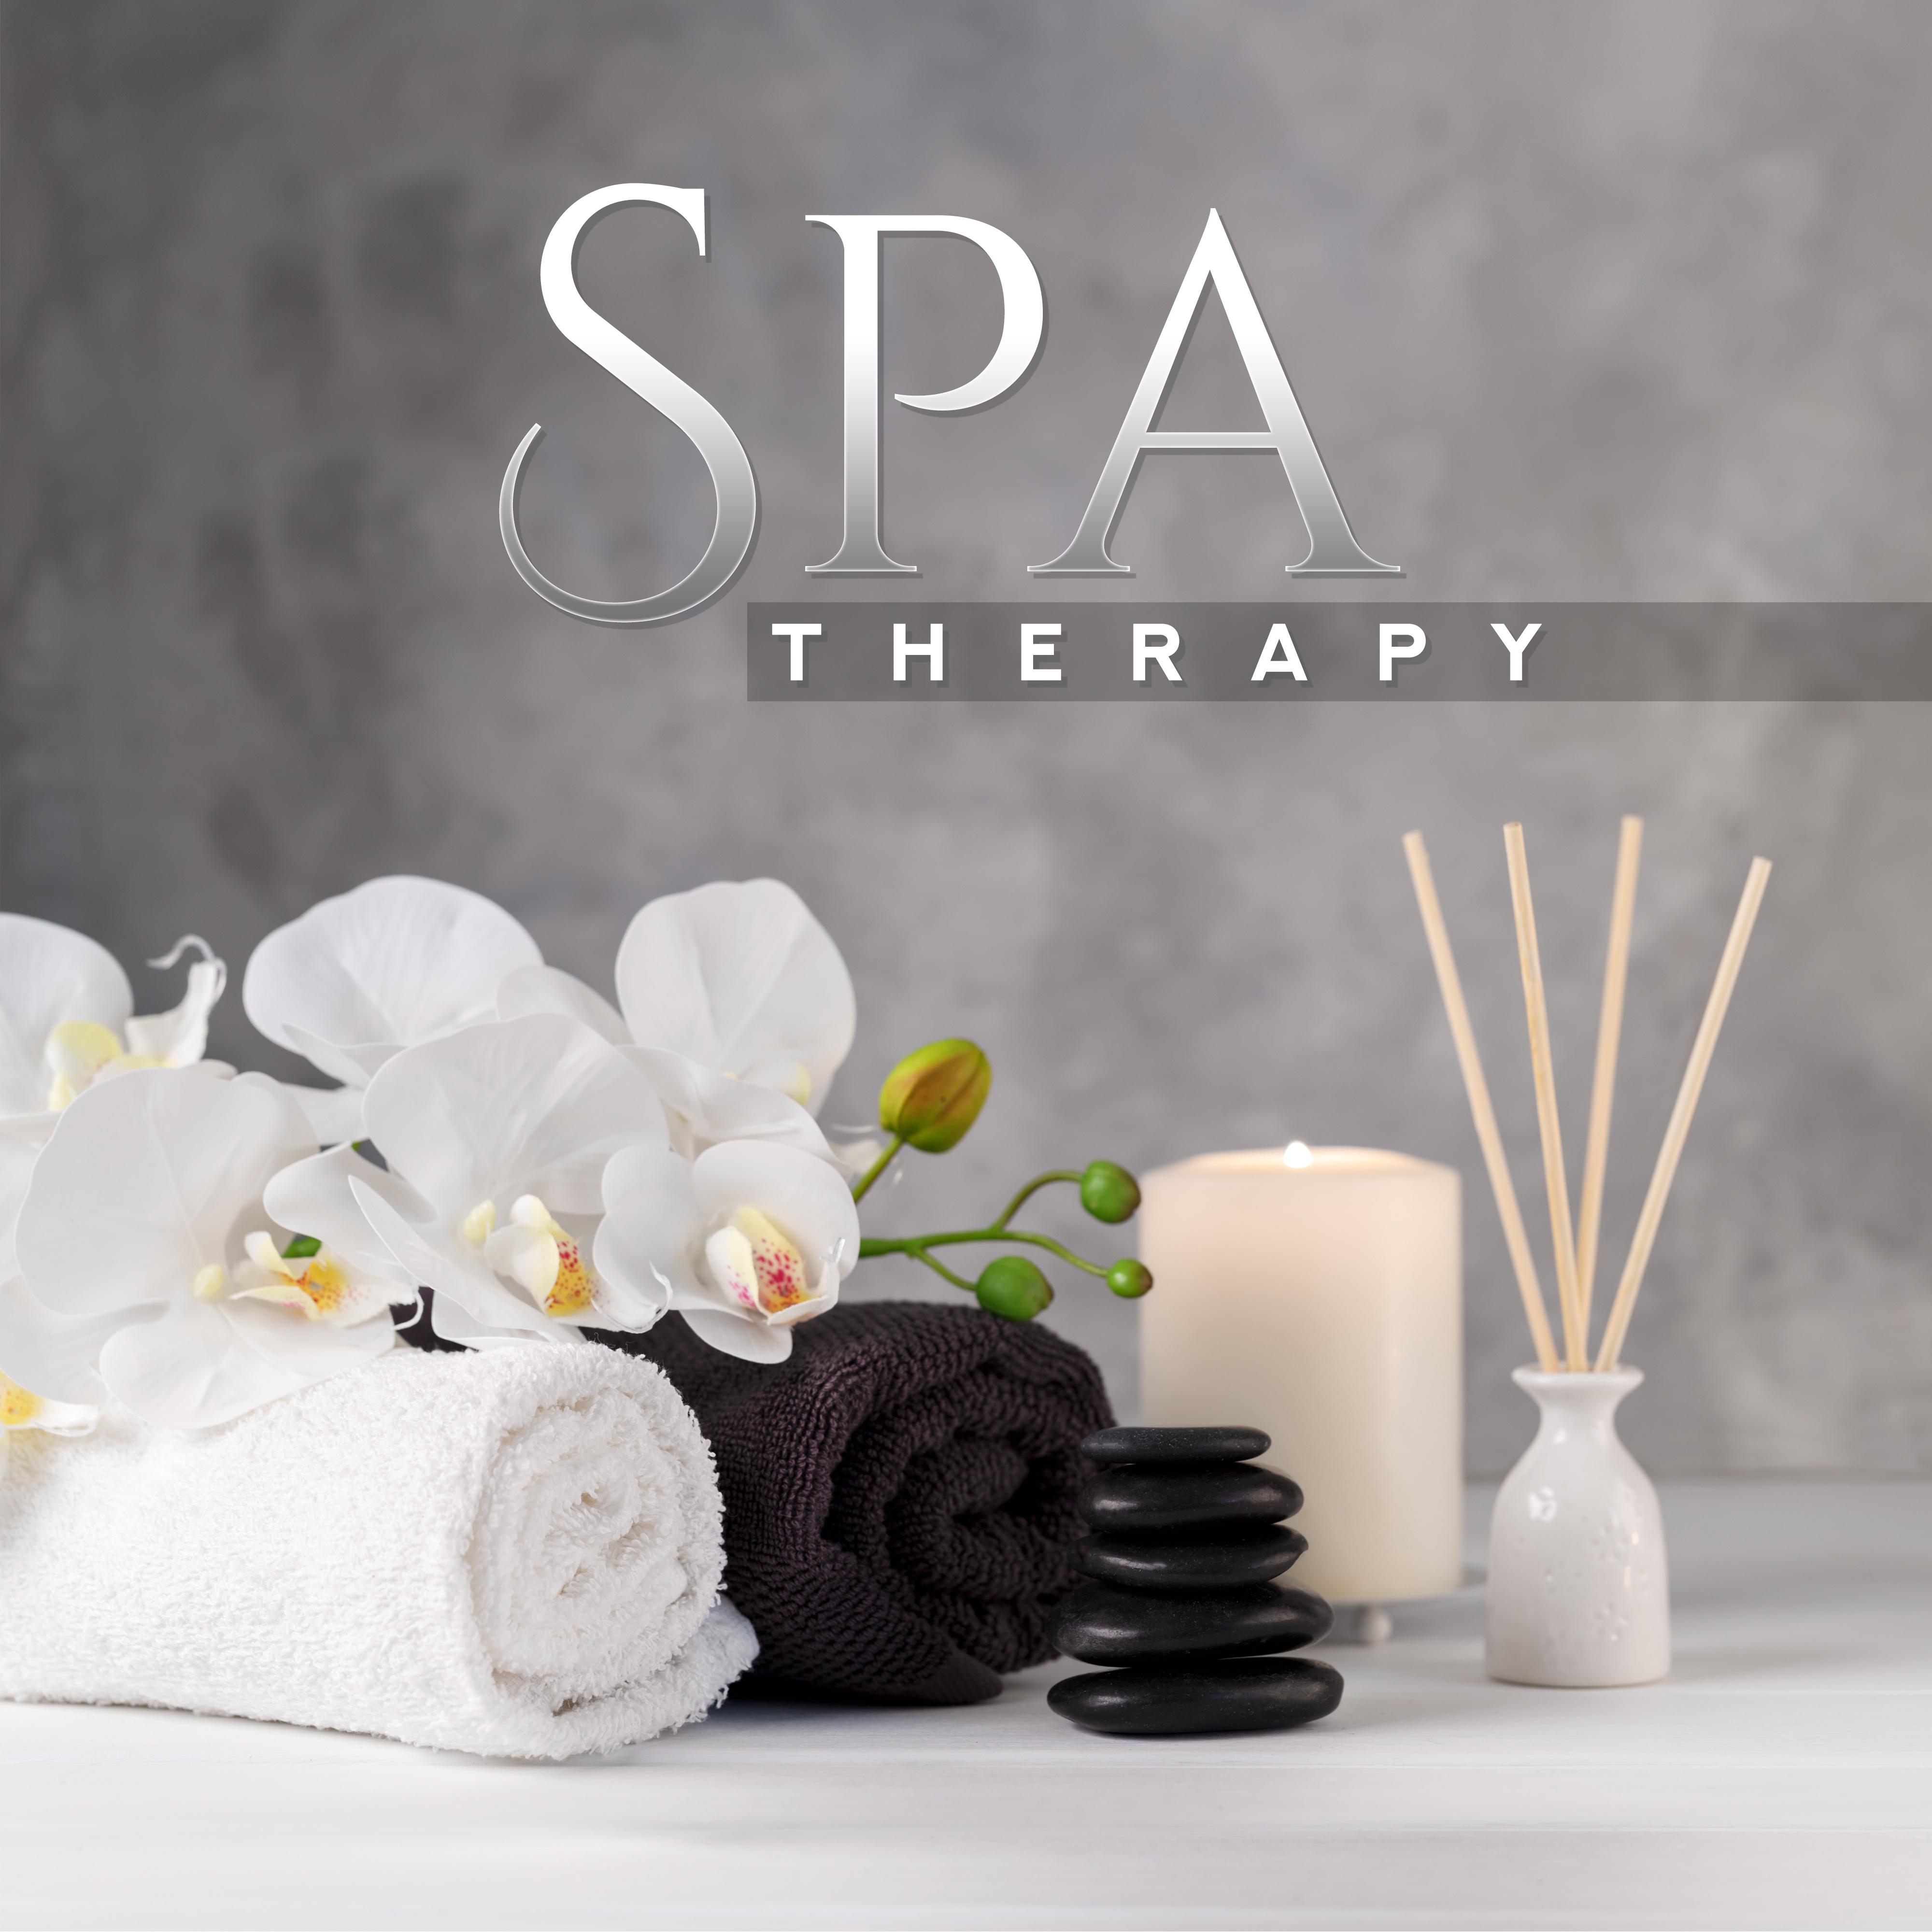 Spa Therapy – Relaxing Sounds for Massage, Wellness, Rest, Sleep, Spiritual Harmony, Deep Relaxation, Soothing Sounds, Relaxing Music Therapy, Spa Zen